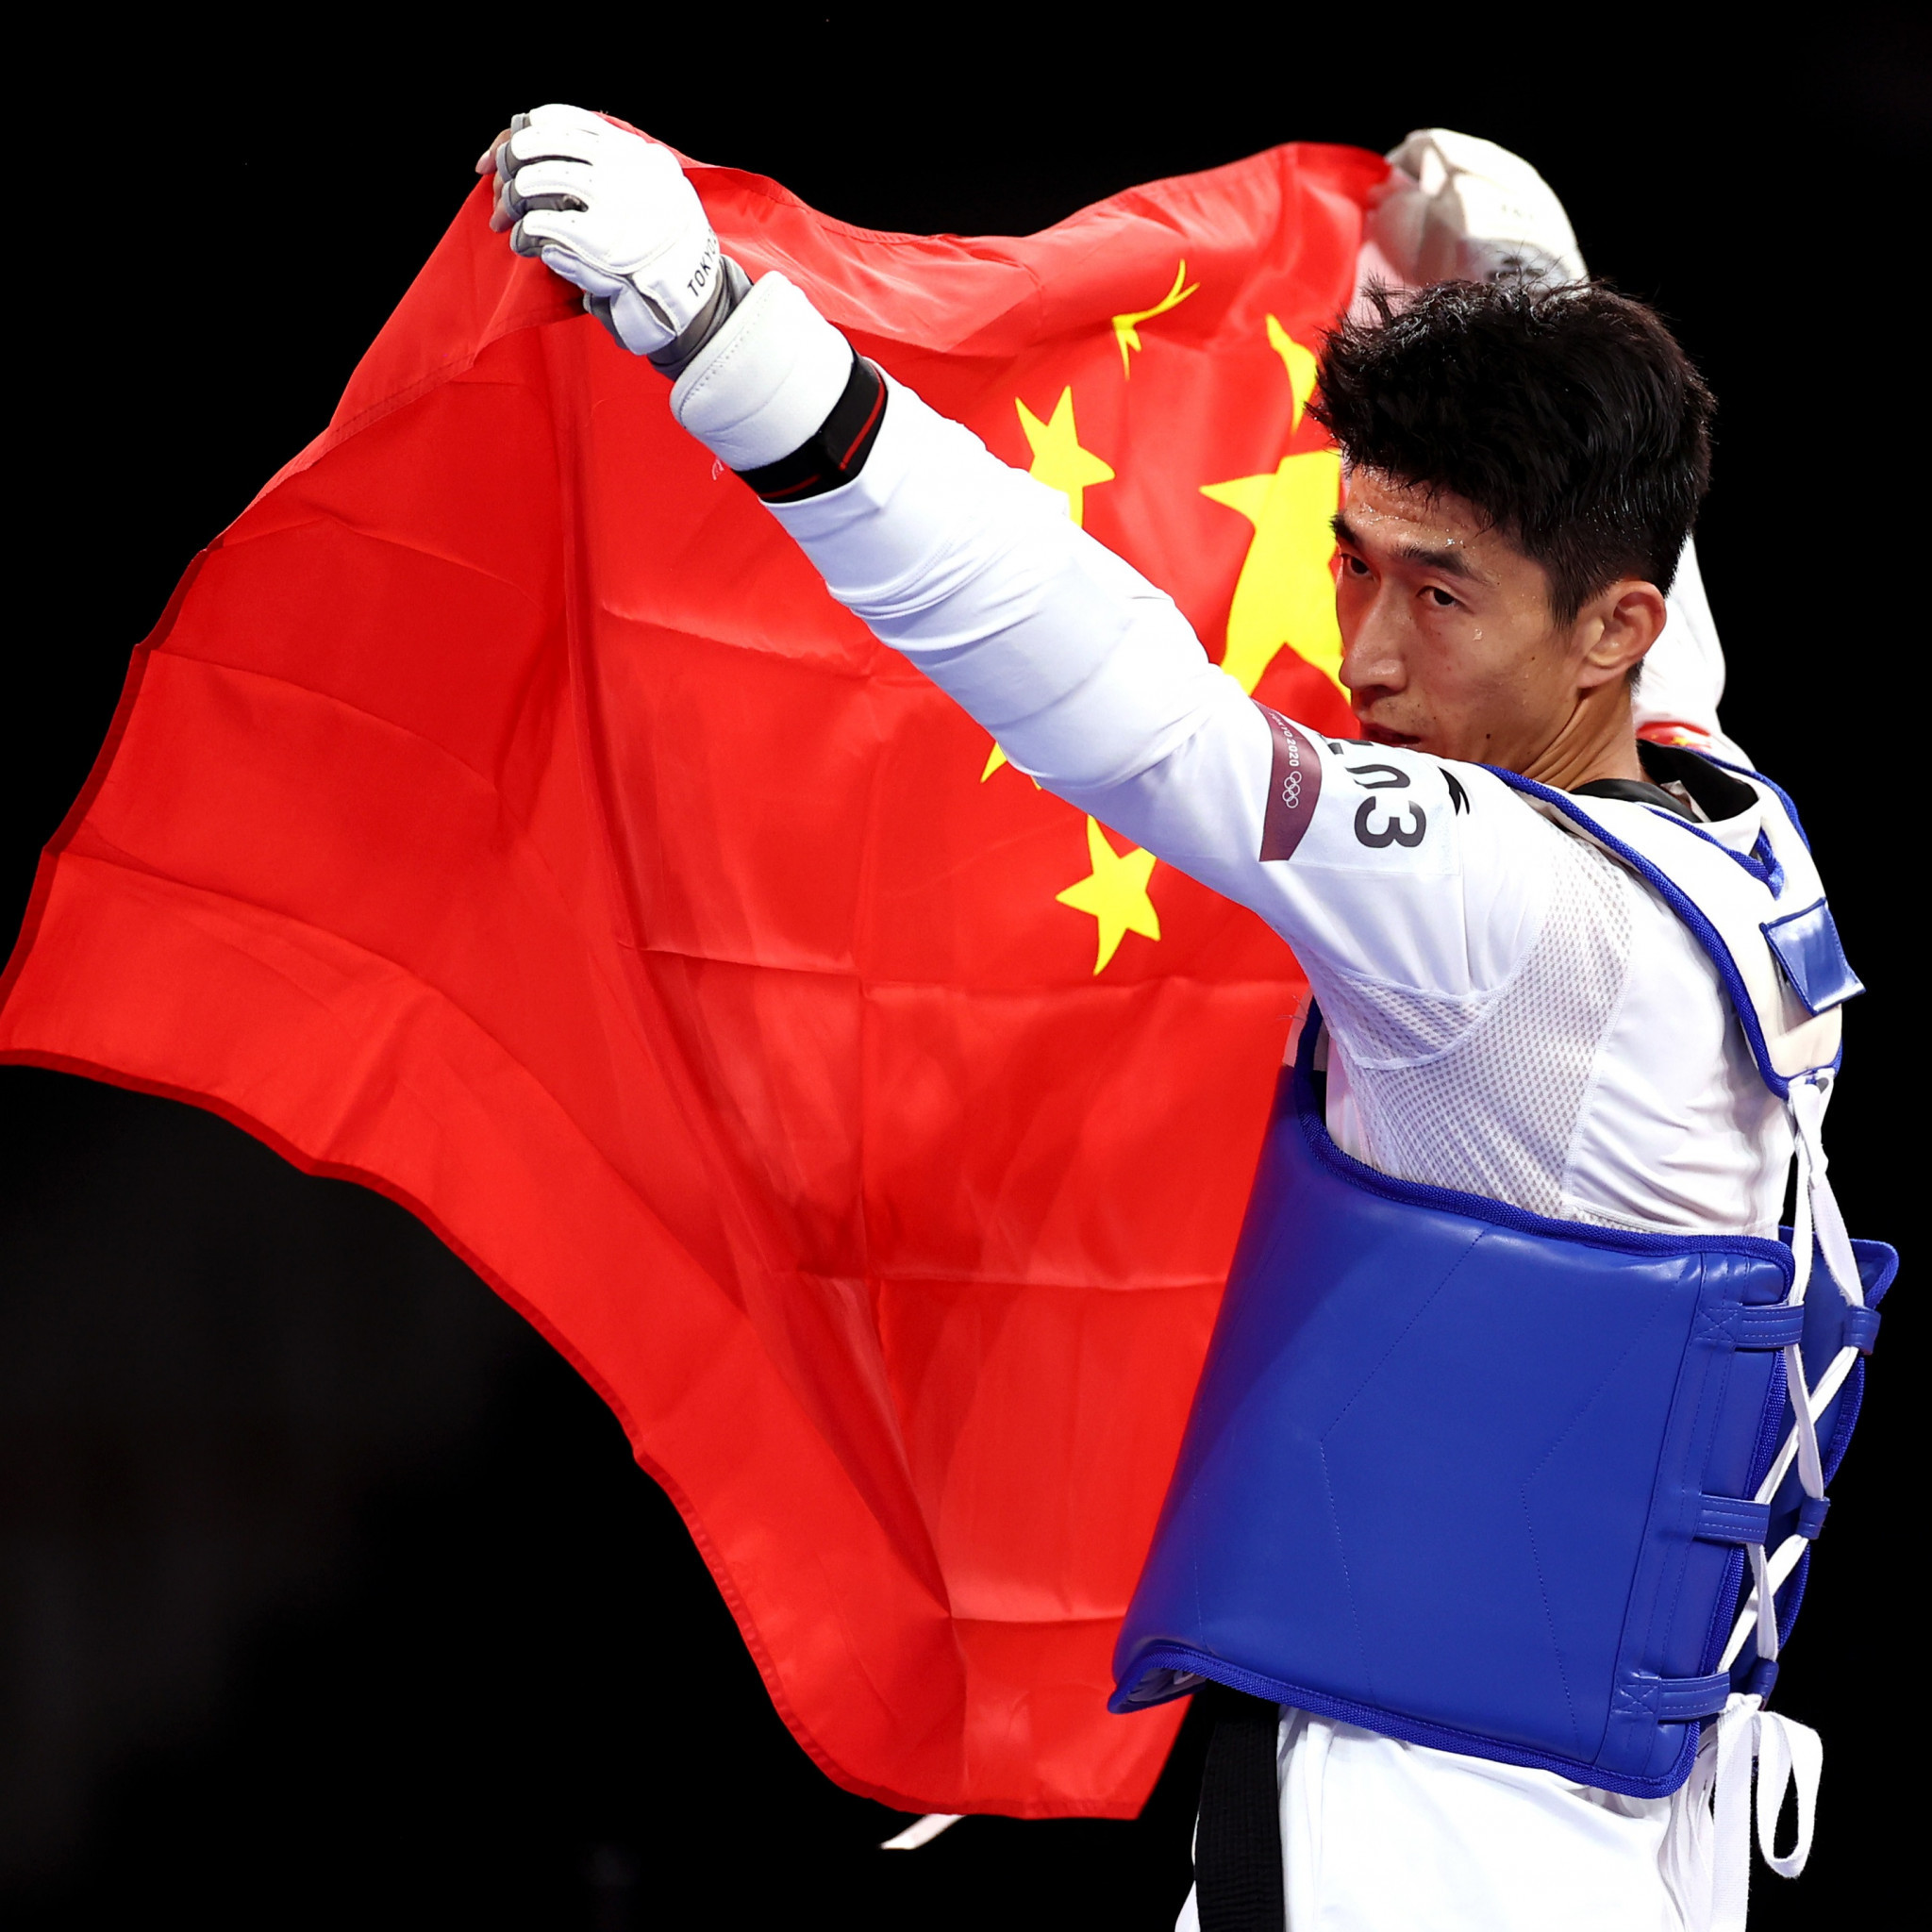 Shuai Zhao: Moving up the divisions to another Olympic medal